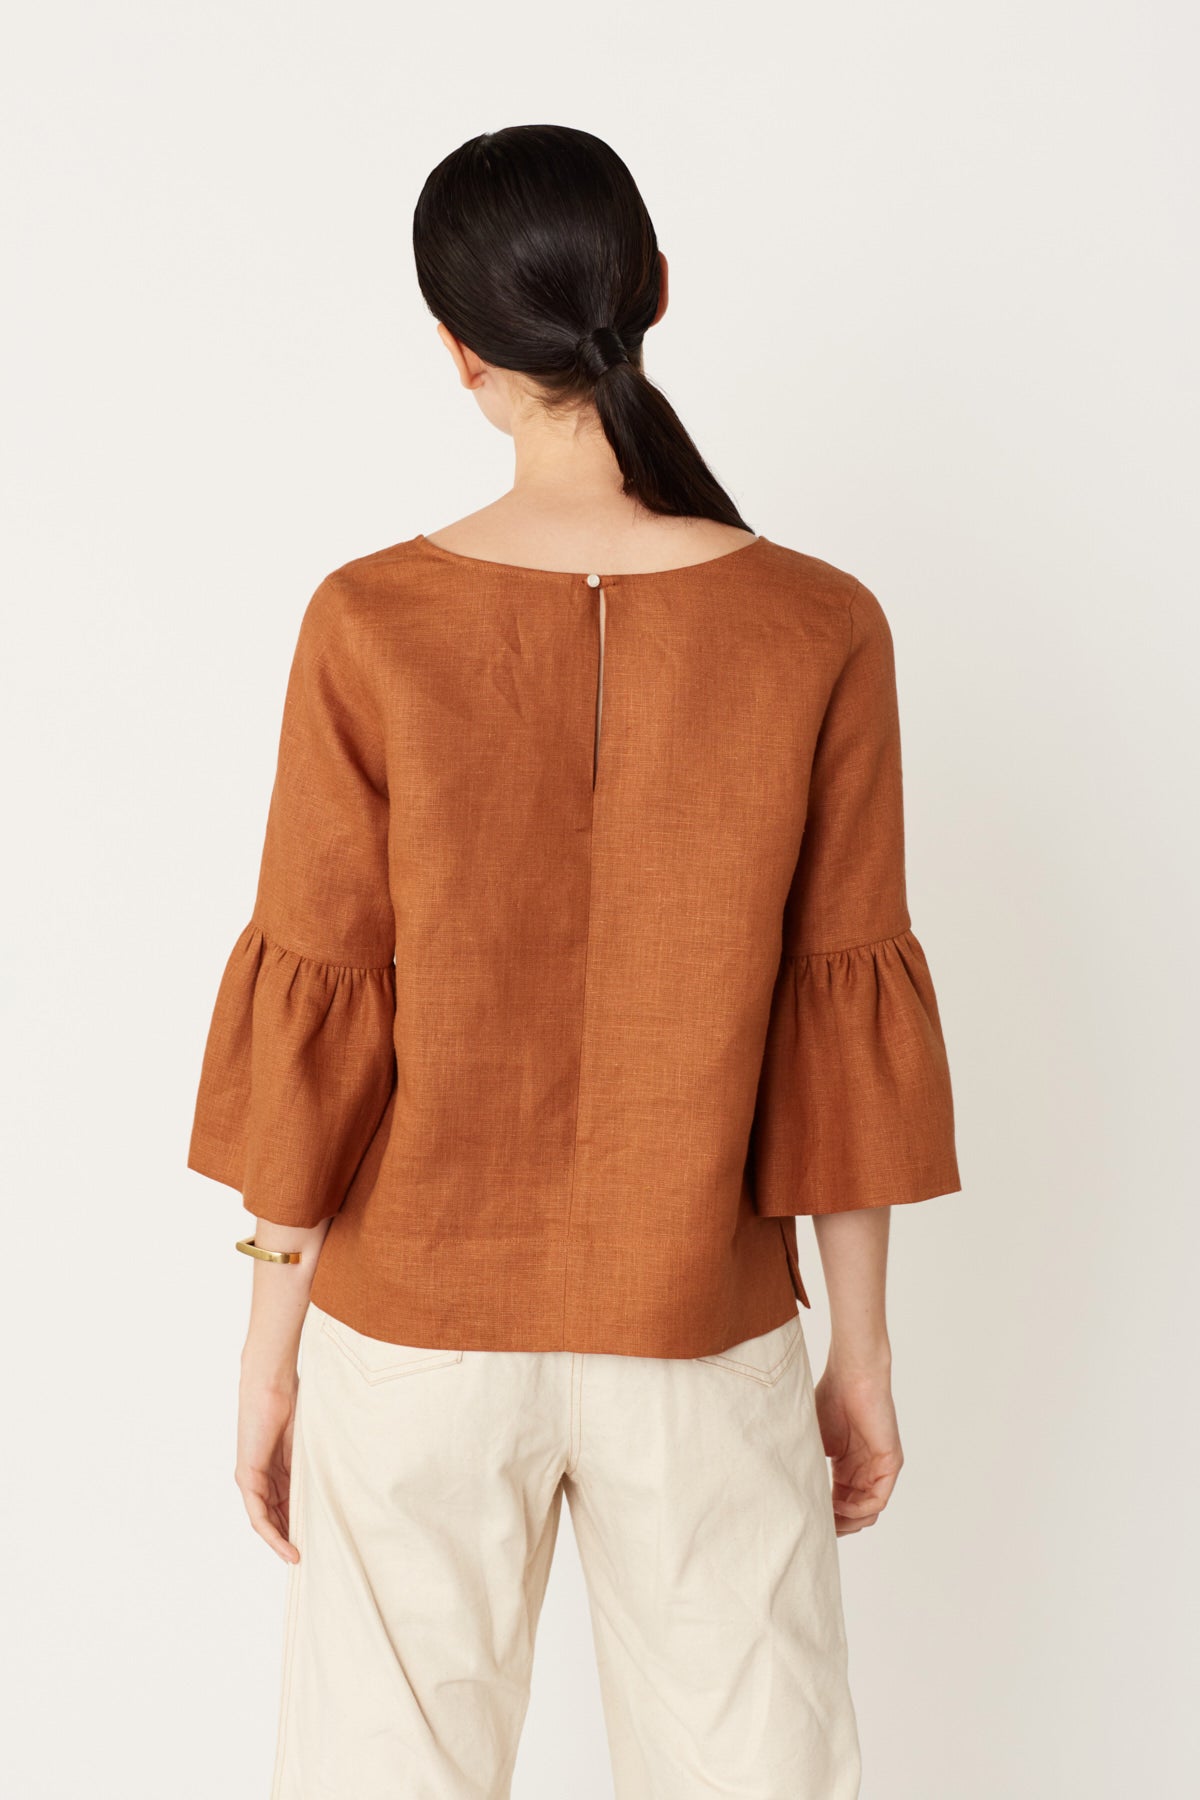 Valentina Top with Ruffle Sleeve in Ocre Linen. Made in Atlanta, ethically and sustainably, by slow fashion designer Megan Huntz. 